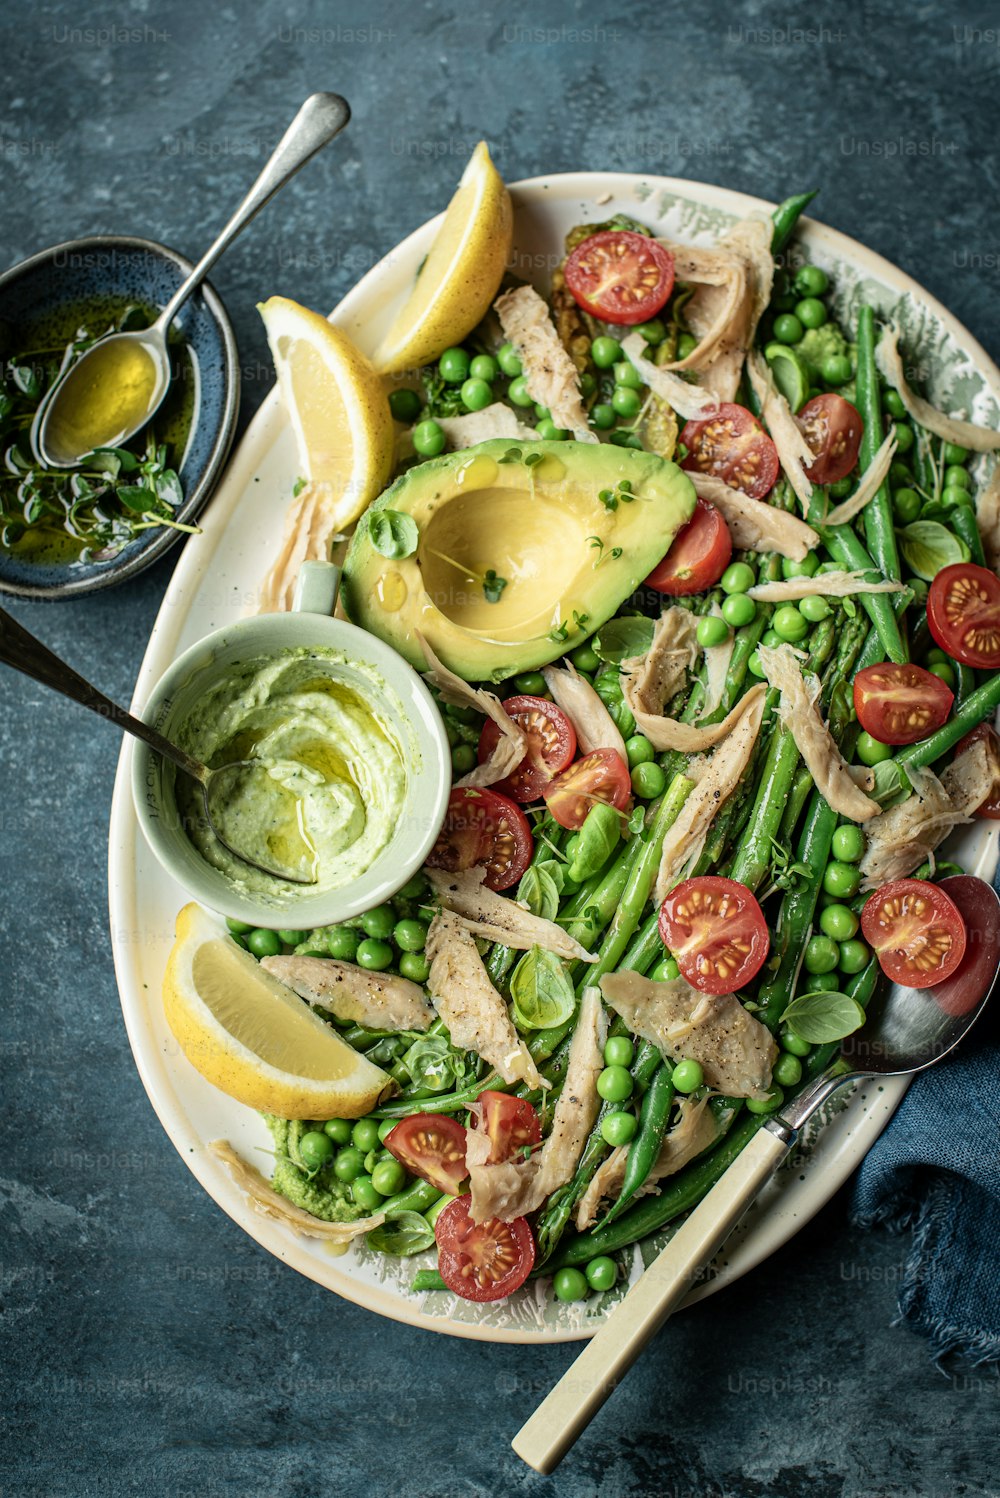 a plate of food with peas, tomatoes, avocado and chicken